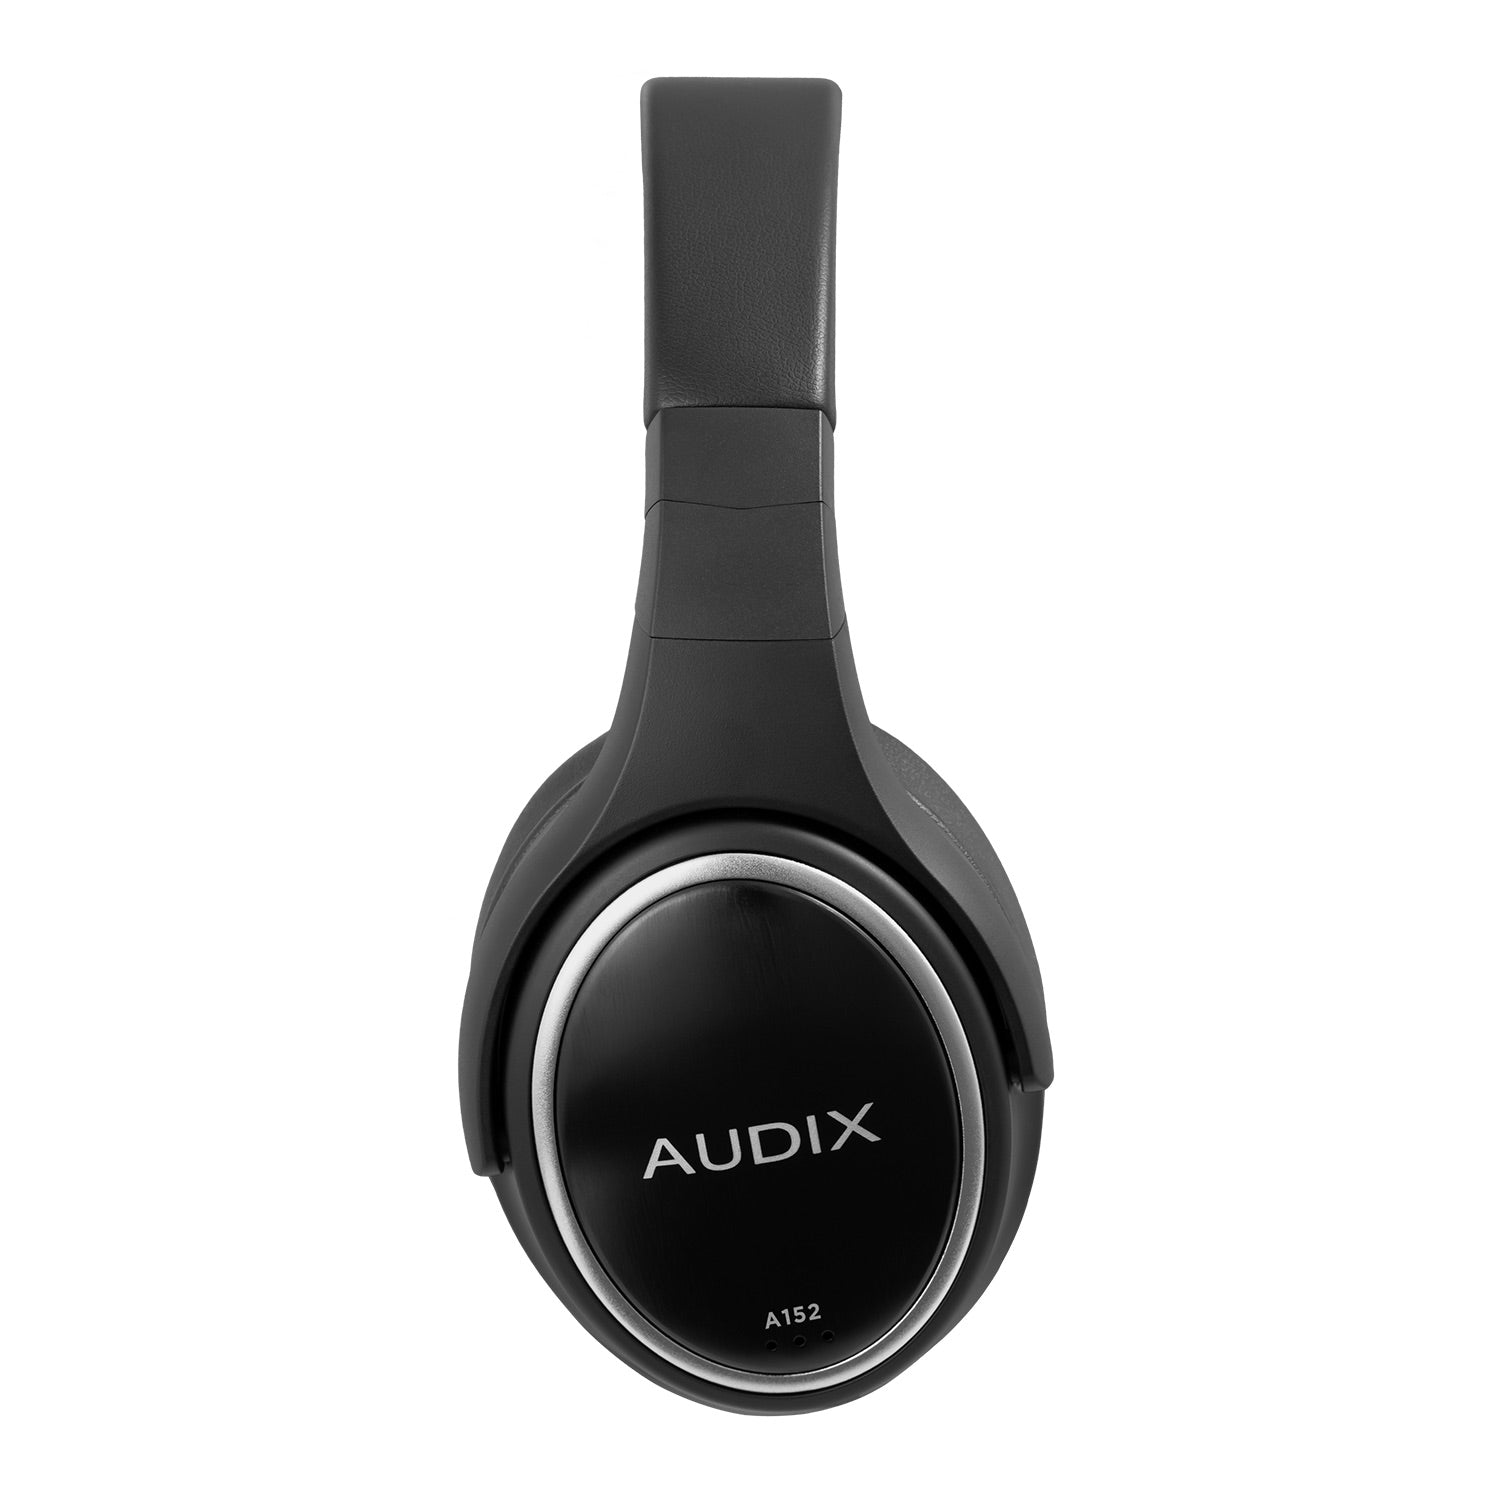 Audix A152 - Studio Reference Headphones with Extended Bass, side